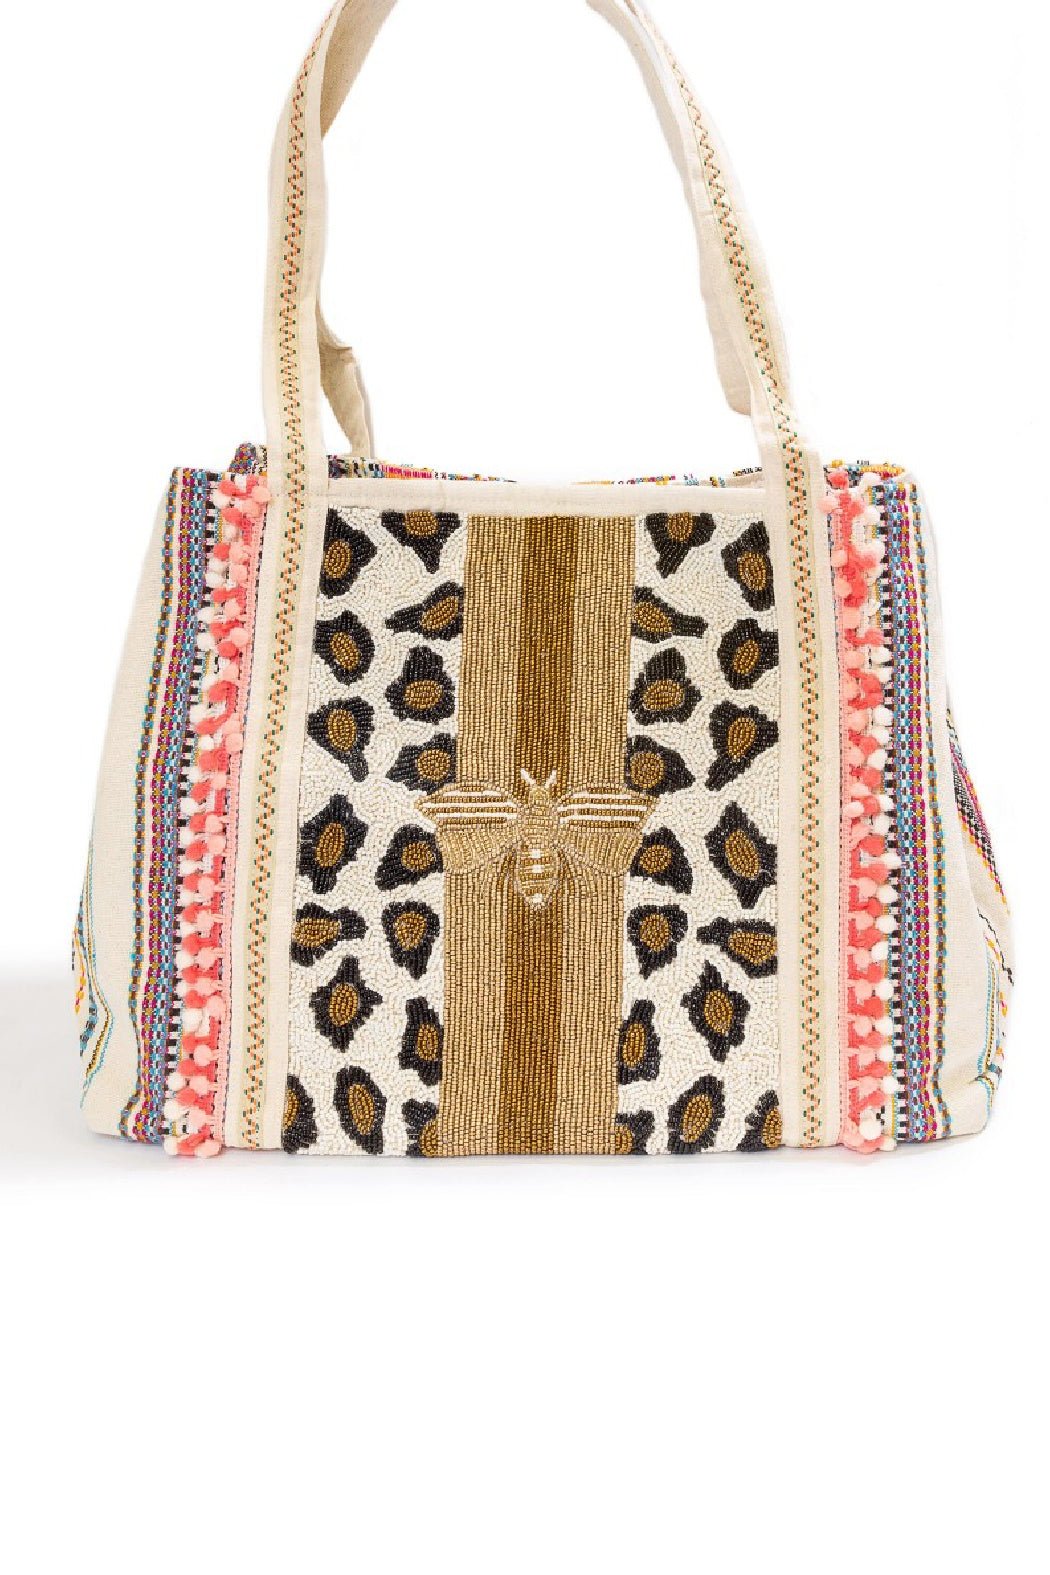 Beaded Leopard Print and Bee Tote Crossbody Bag